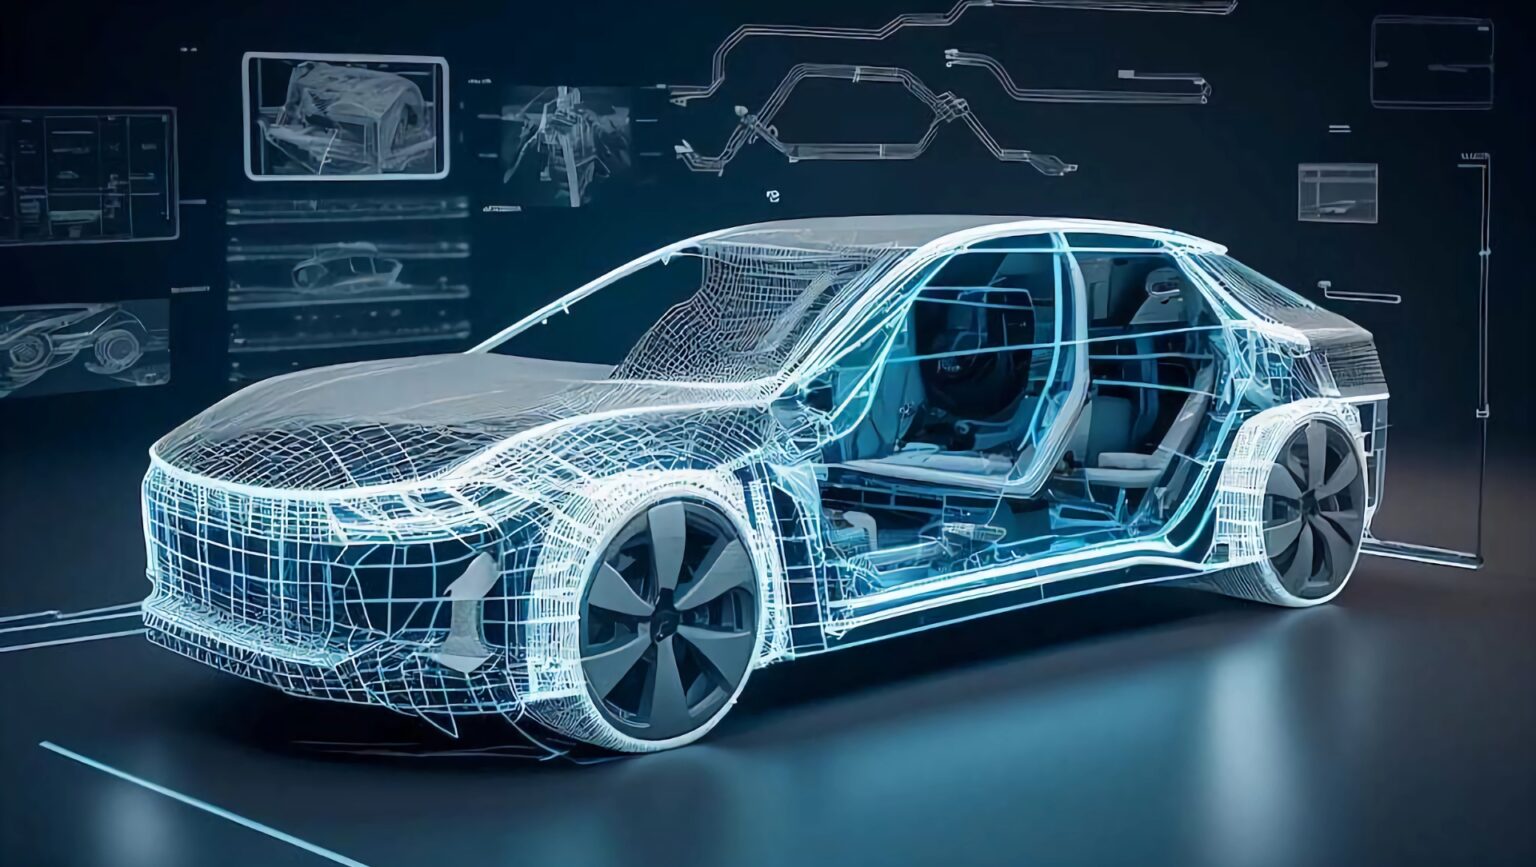 How is Toyota using AI for Future Vehicle Design?